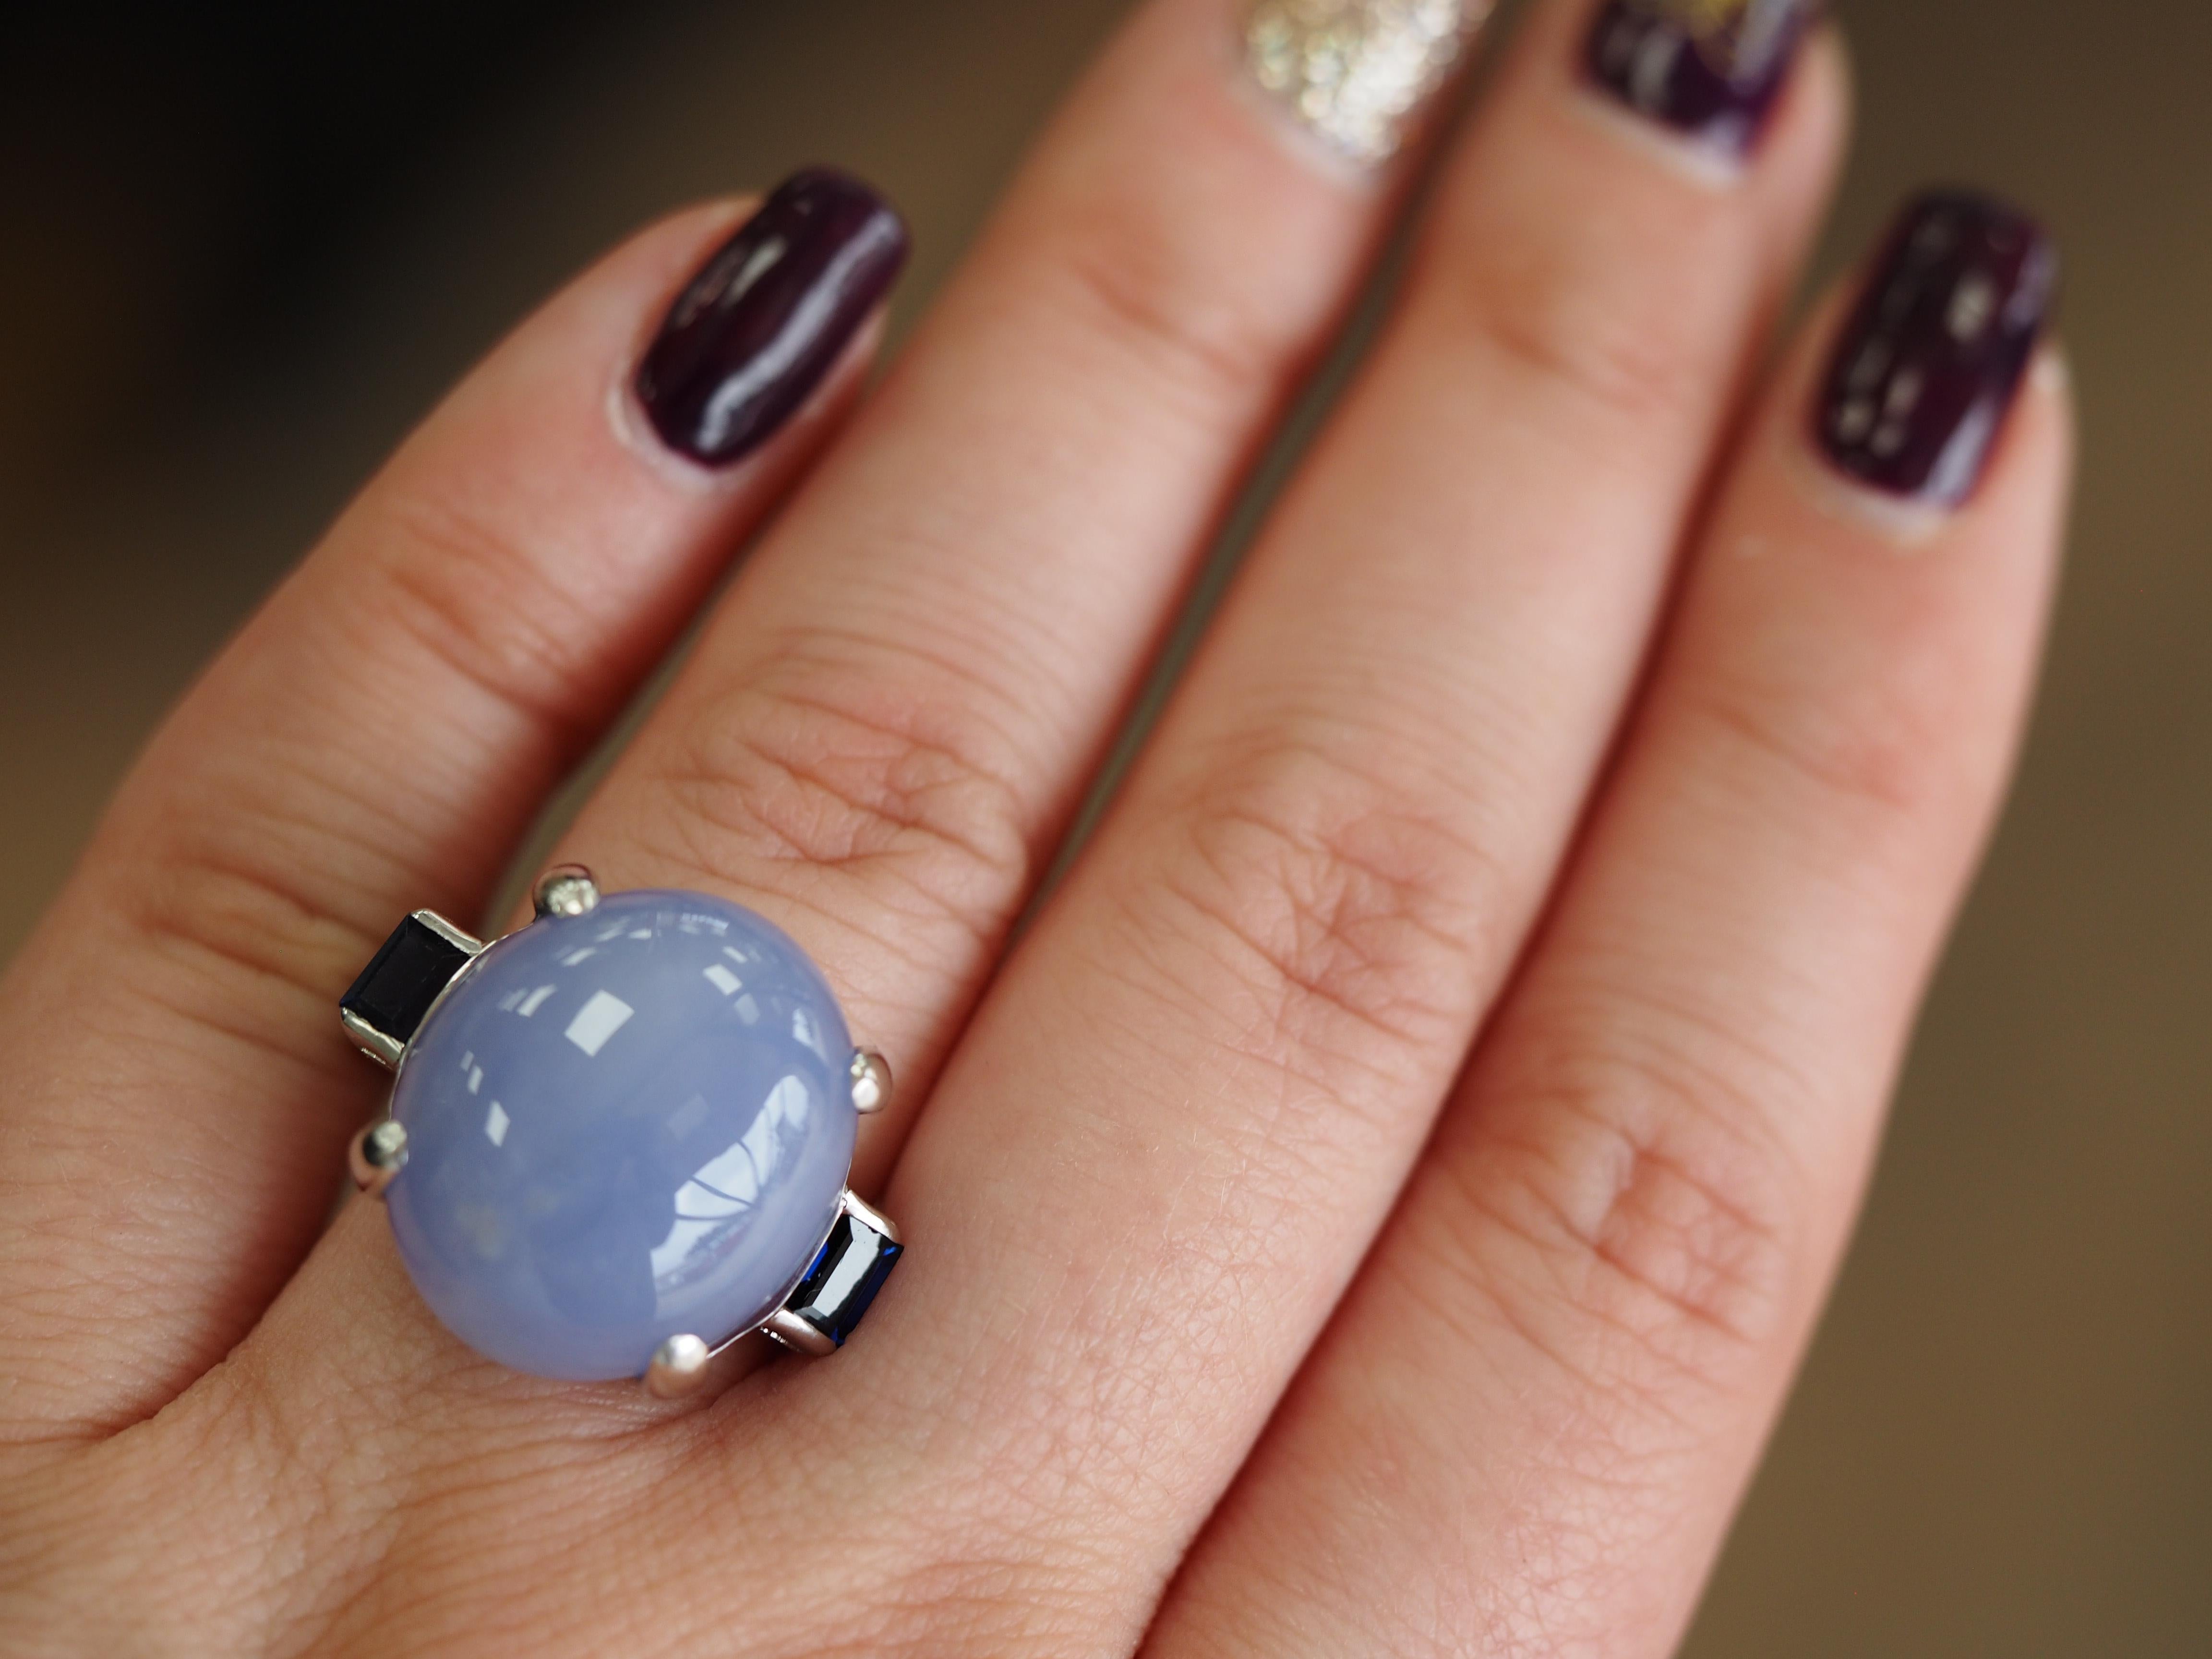 14K White Gold Lavender Jade & Sapphire Cocktail Ring. The stone is set into a 14 karat white gold four prong setting, the two side sapphires are set with delicate prongs. Ring weighs 10.3 grams. Finger size 8.5, this ring is sizable.

Earring